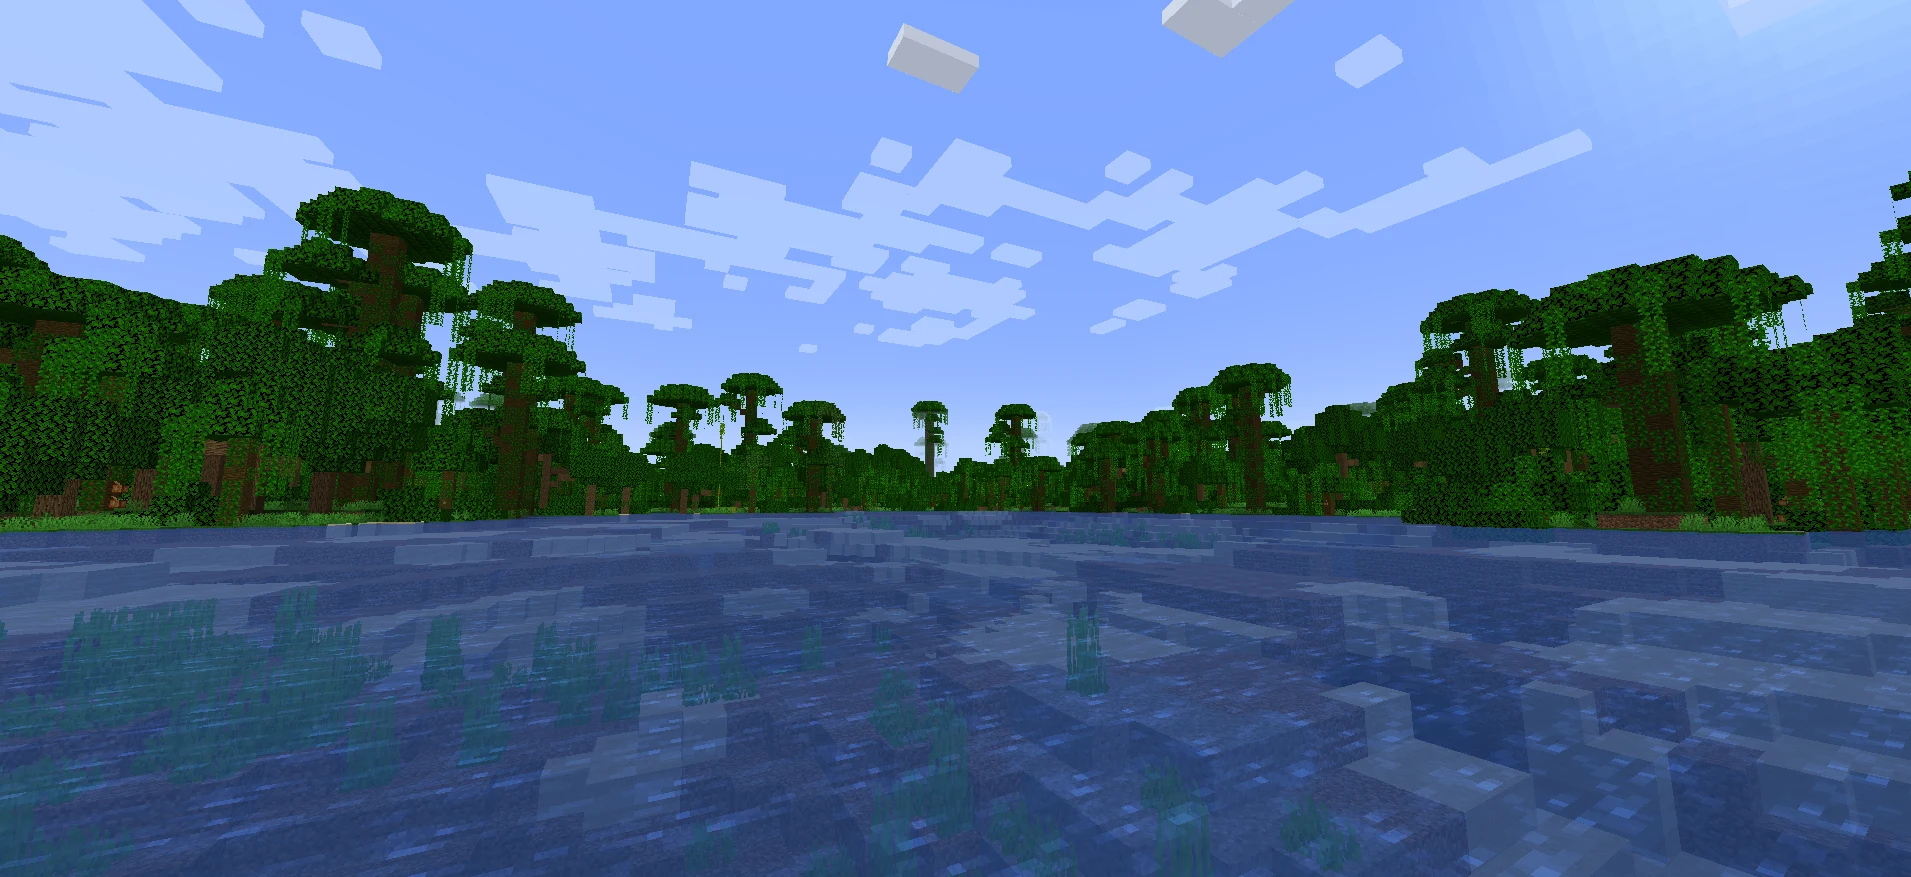 Minecraft Jungle Biome With Ocean View